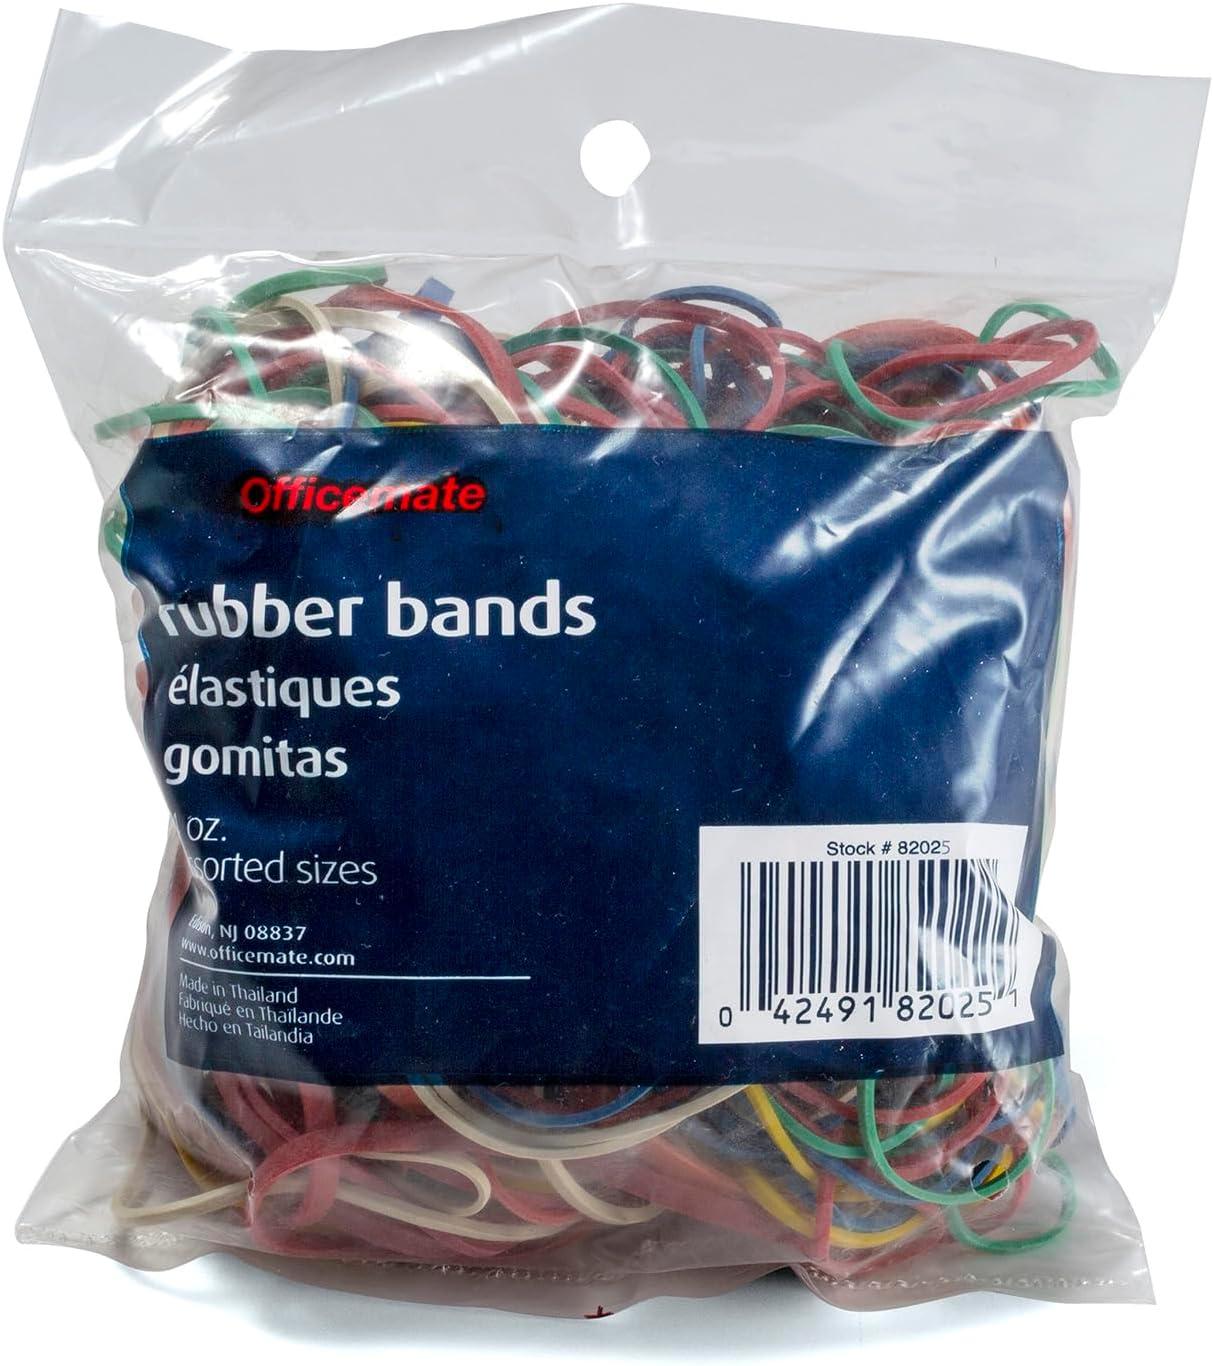 officemate assorted size and color rubber bands 4 oz 82025 0 05 x 5 75 x 1 75 inches  officemate b07qjh4nyq